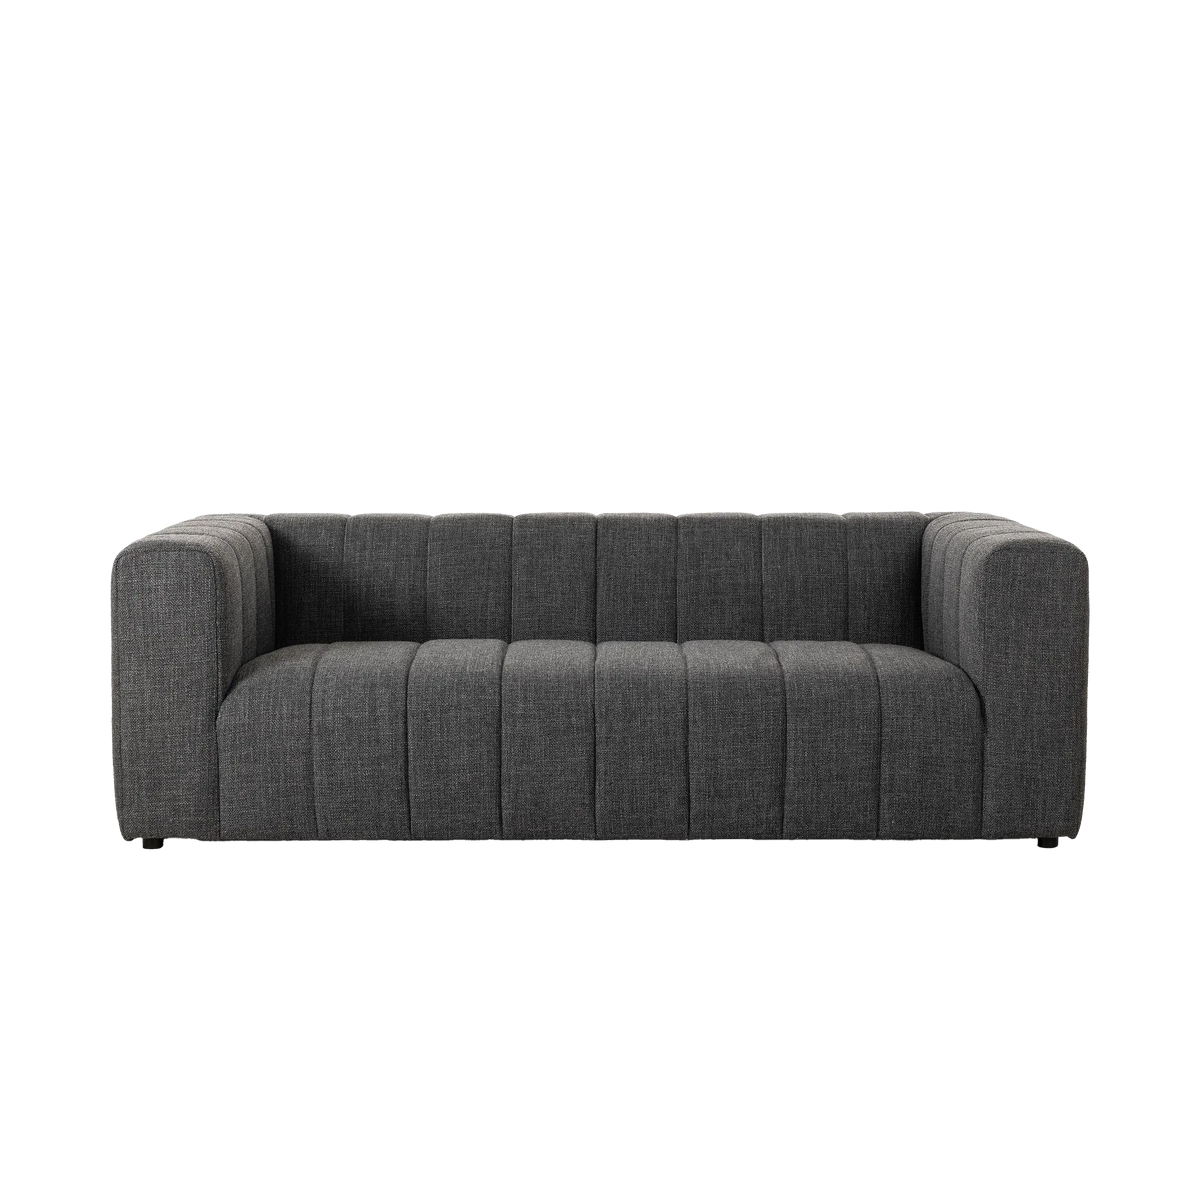 Experience the art of lounging in style with the Santos Sofa.